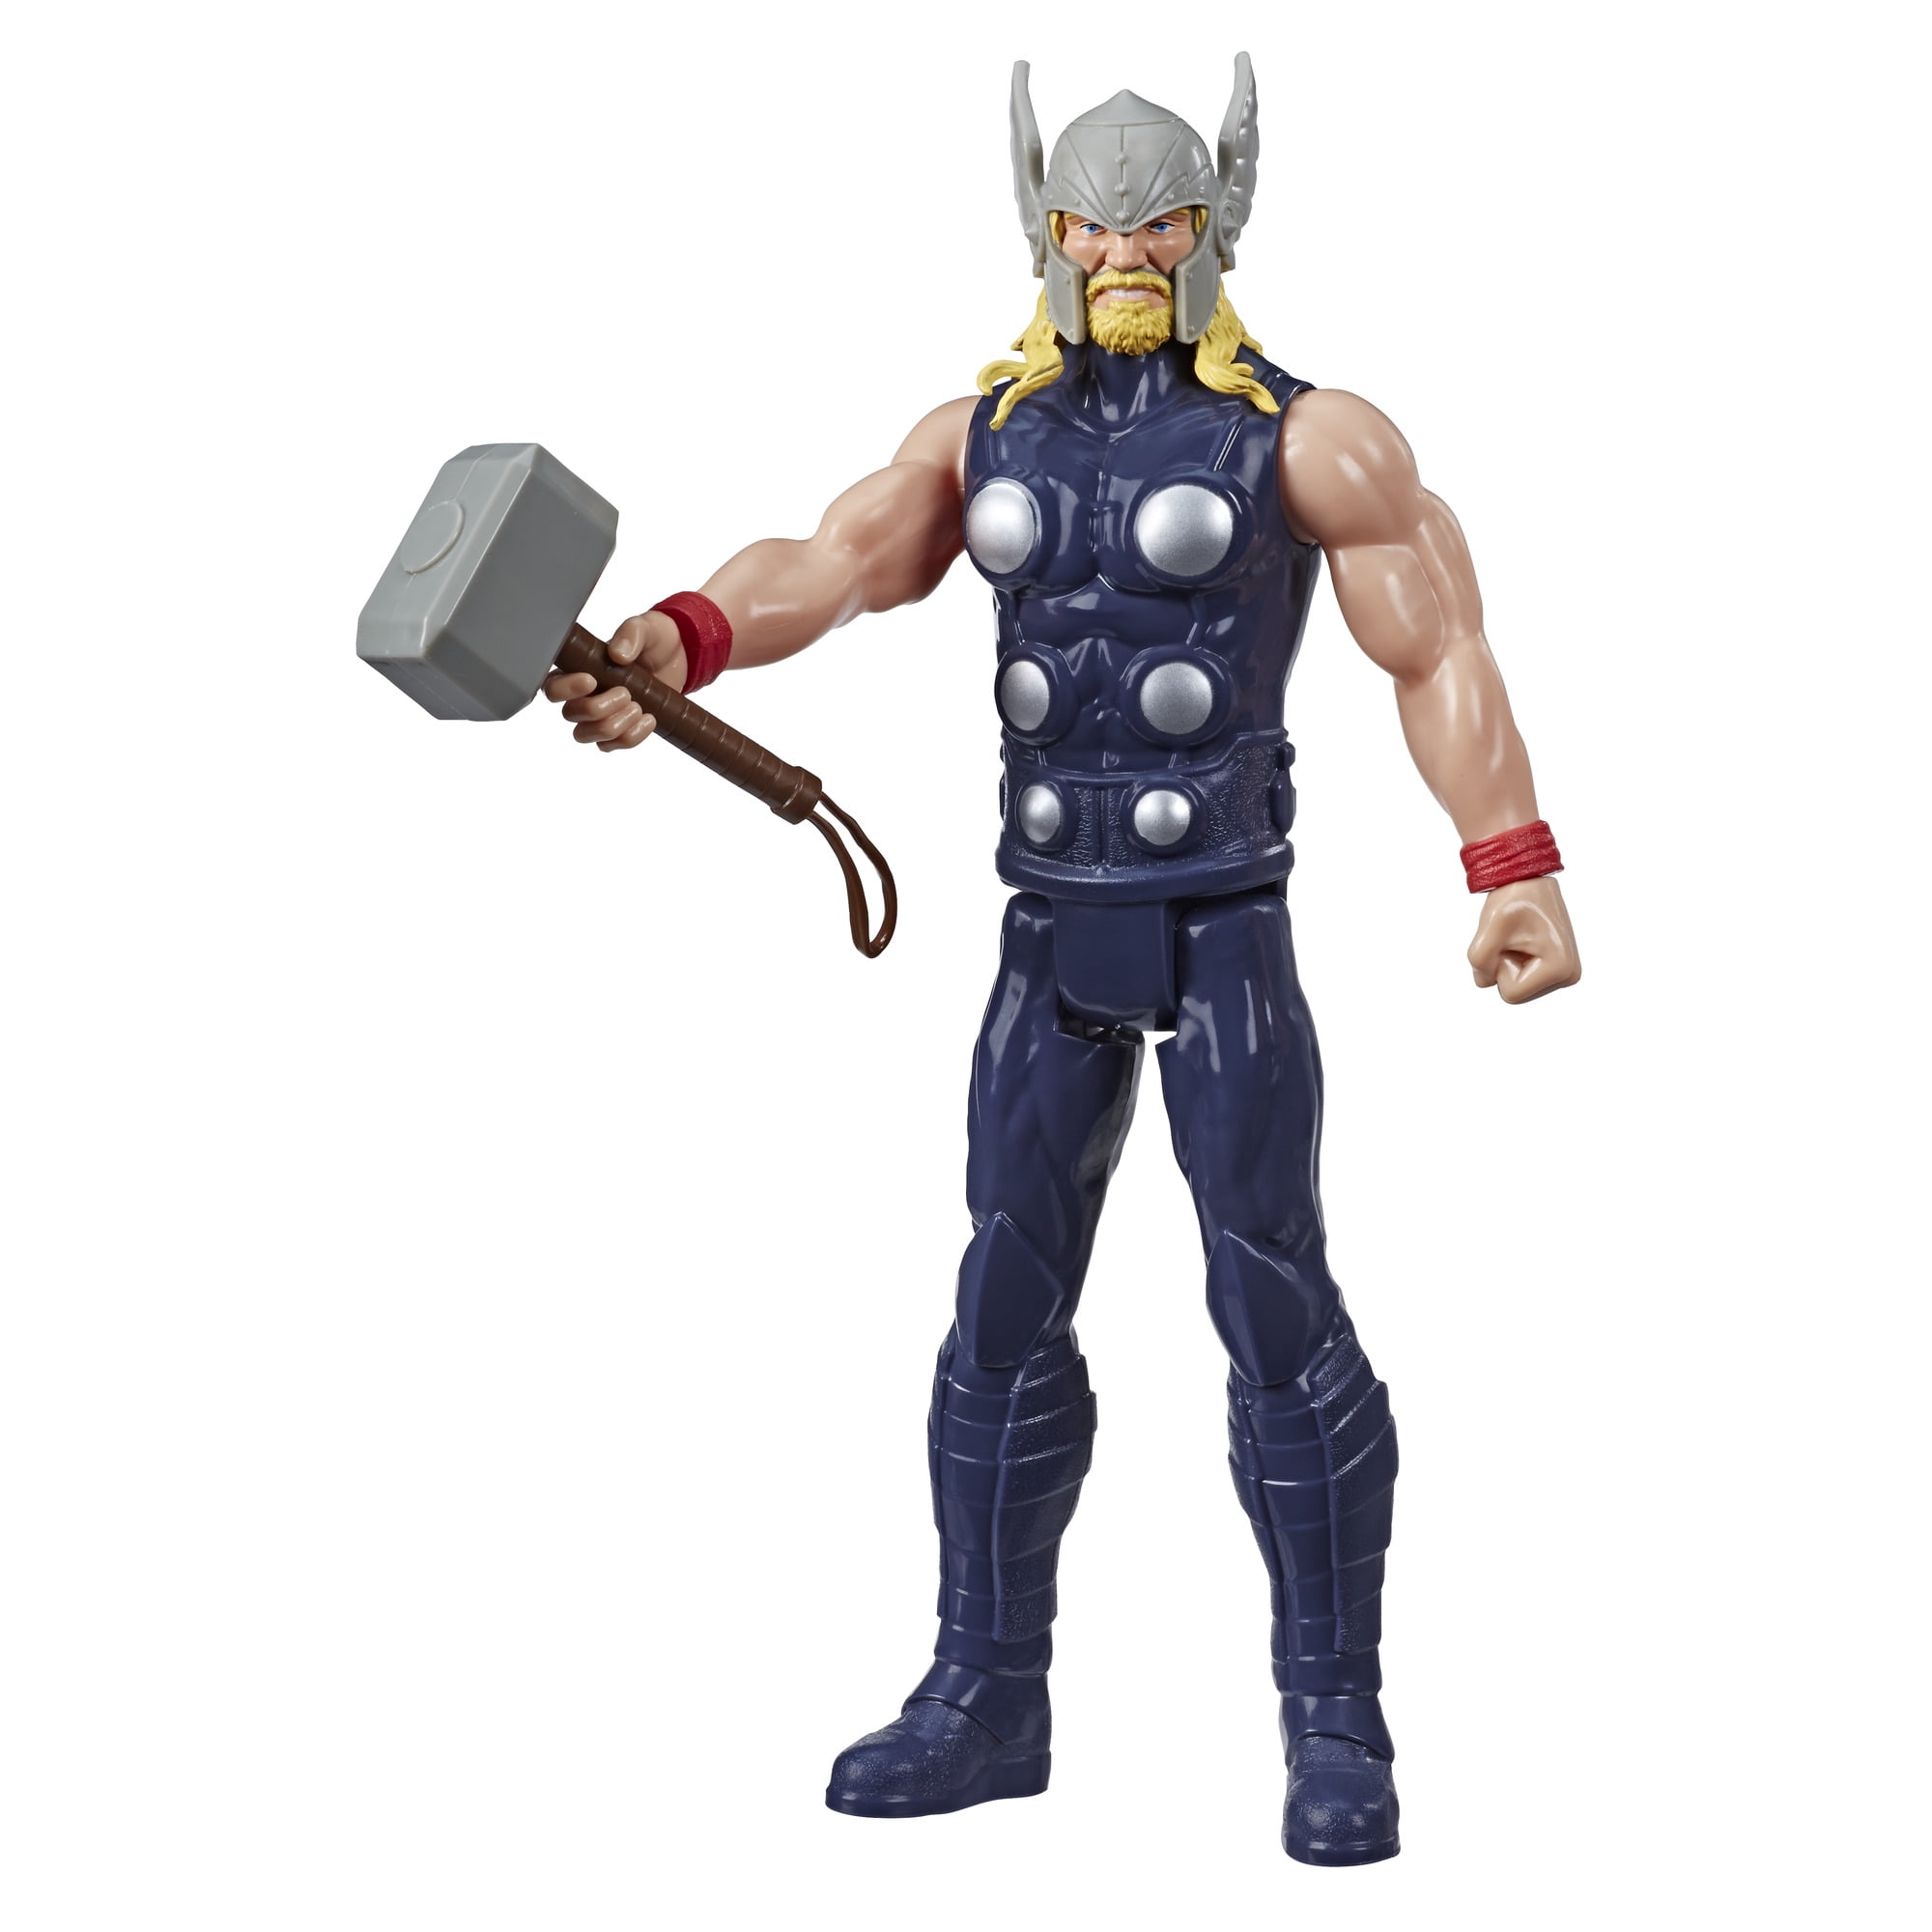 AVENGERS ENDGAME THOR TITAN HERO SERIES OFFICIAL NEW COLLECTABLE TOY 